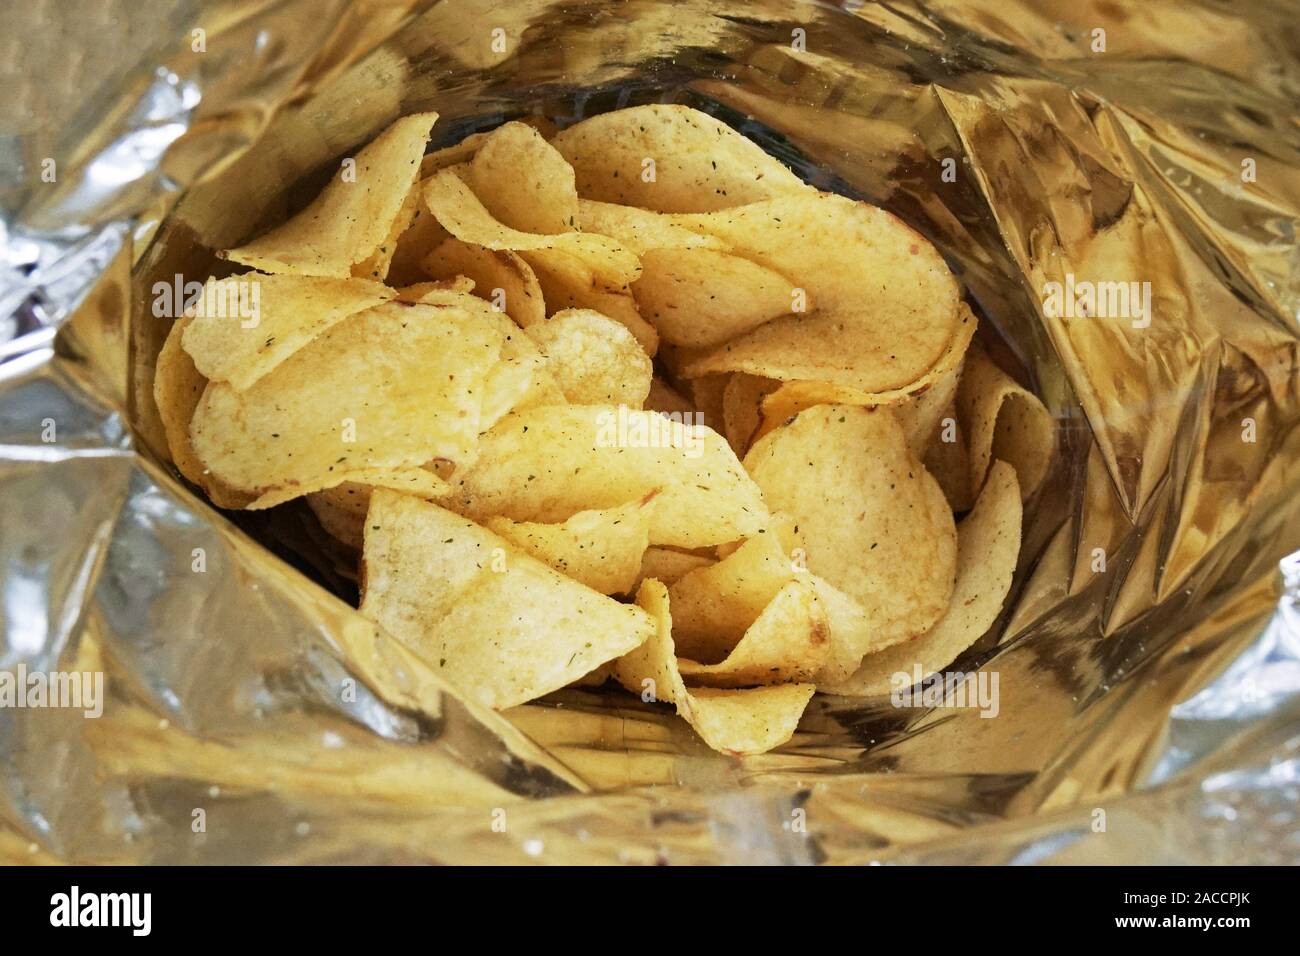 close-up look inside a bag of potato chips or packet of crisps, cheese and onion flavor Stock Photo